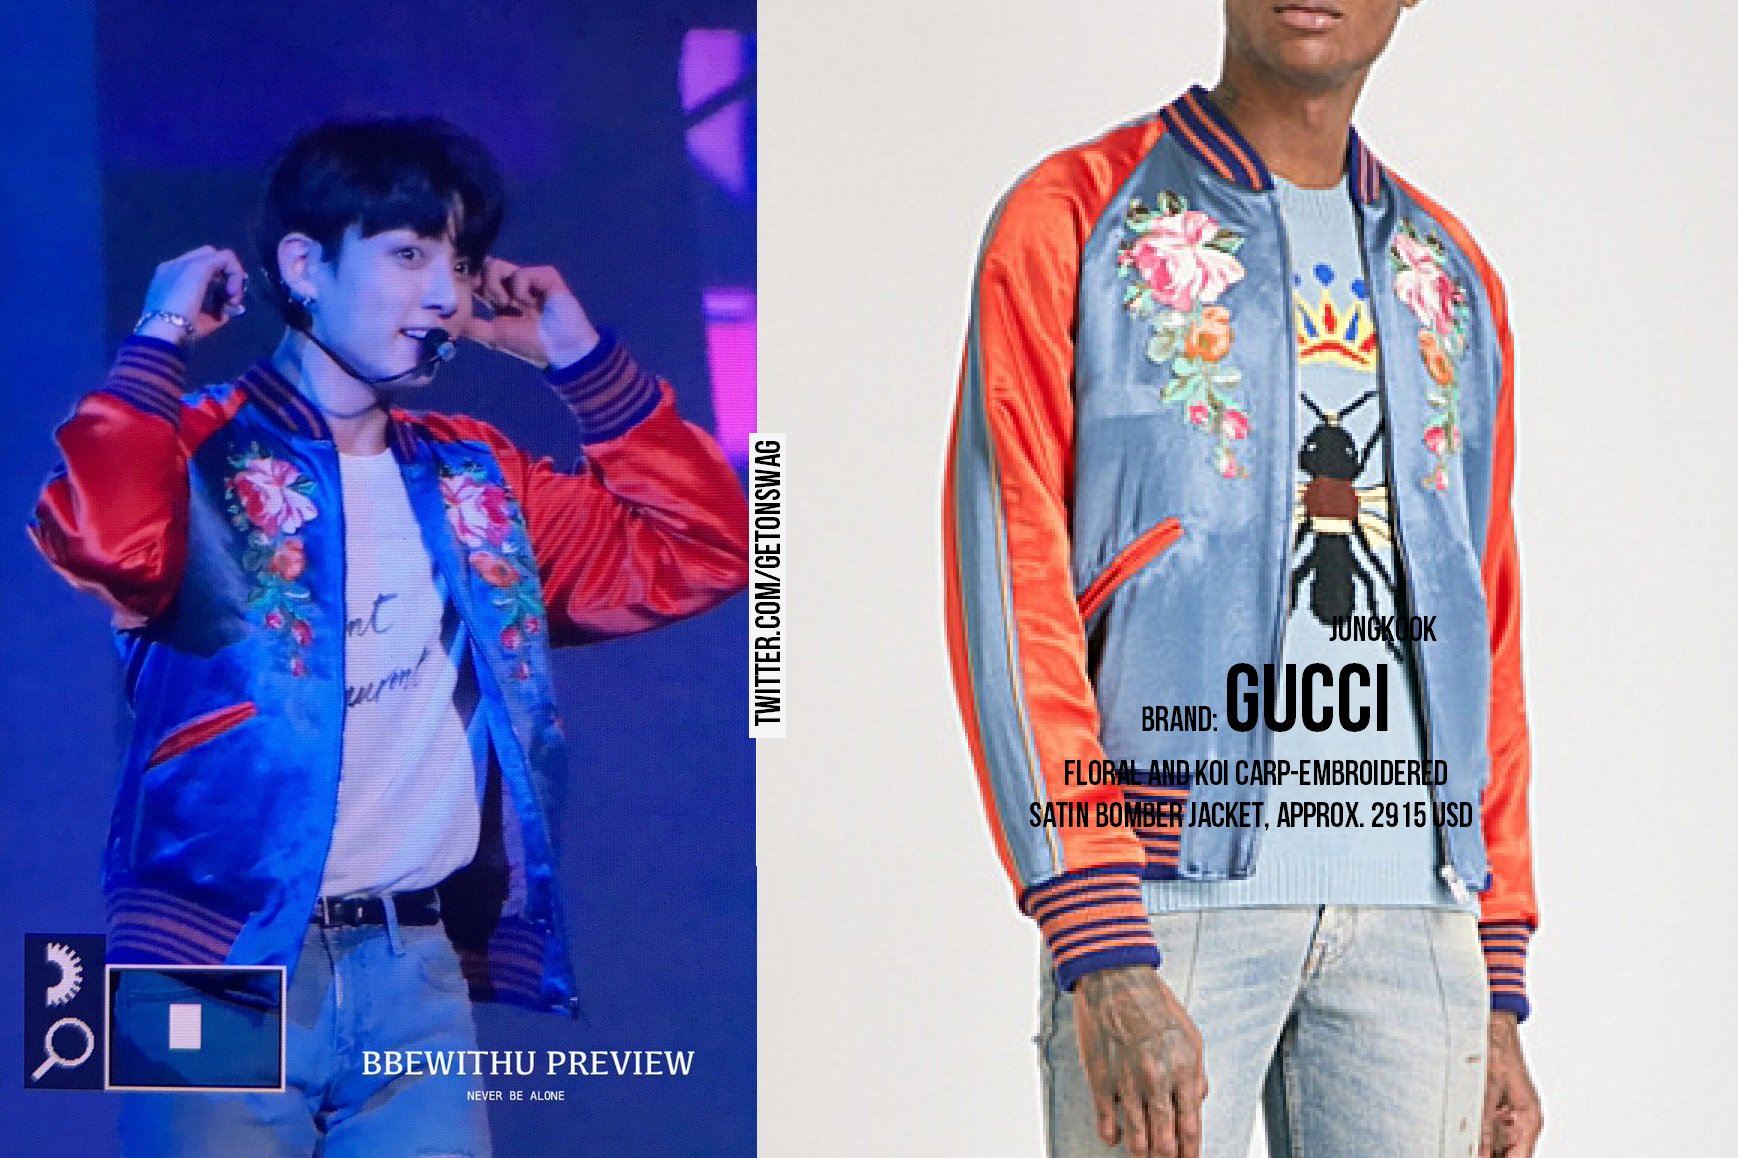 Beyond The Style ✼ Alex ✼ on Twitter: #BTS 171119 #AMAs2017 #amas #JUNGKOOK #정국 #방탄소년단 GUCCI - Floral and Koi carp-embroidered satin bomber jacket, approx. 2915 usd https://t.co/q5W9MqX9W6" / X